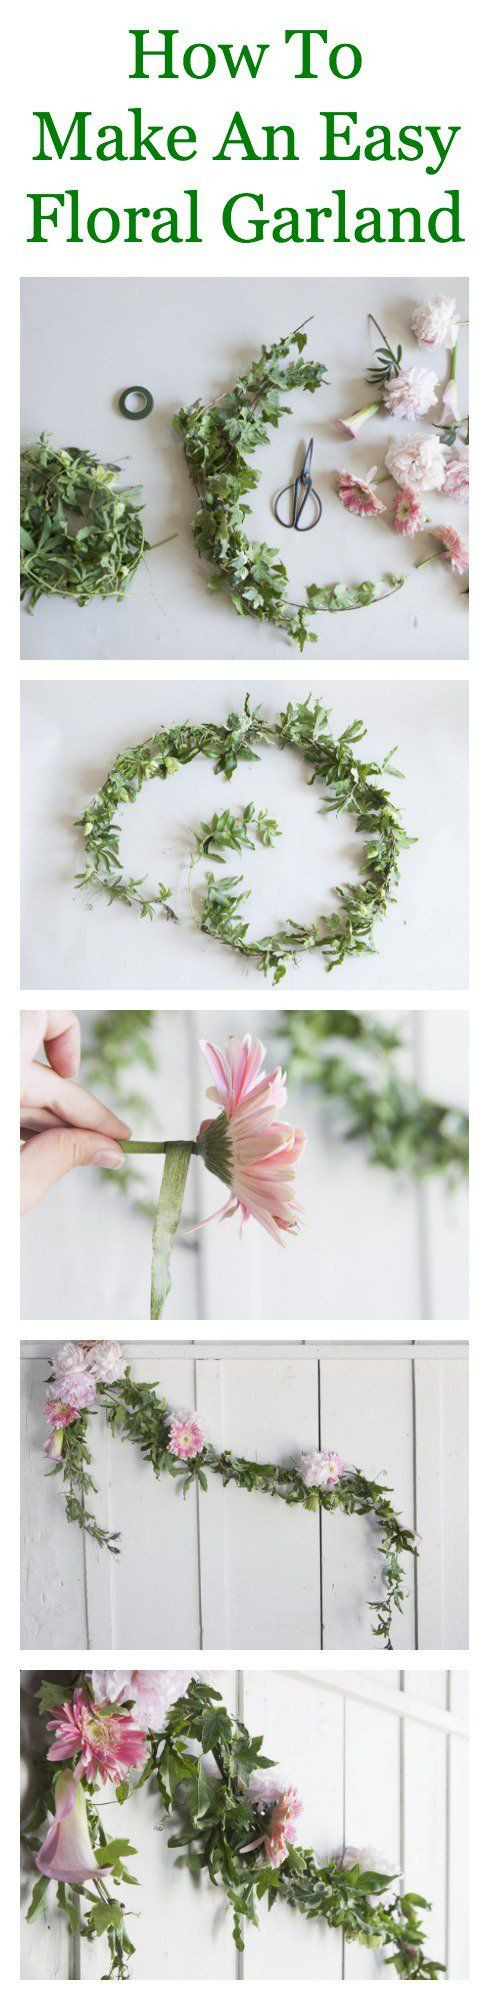 Wedding Garland DIY
 12 DIY Floral Garland Projects for Your Home Pretty Designs